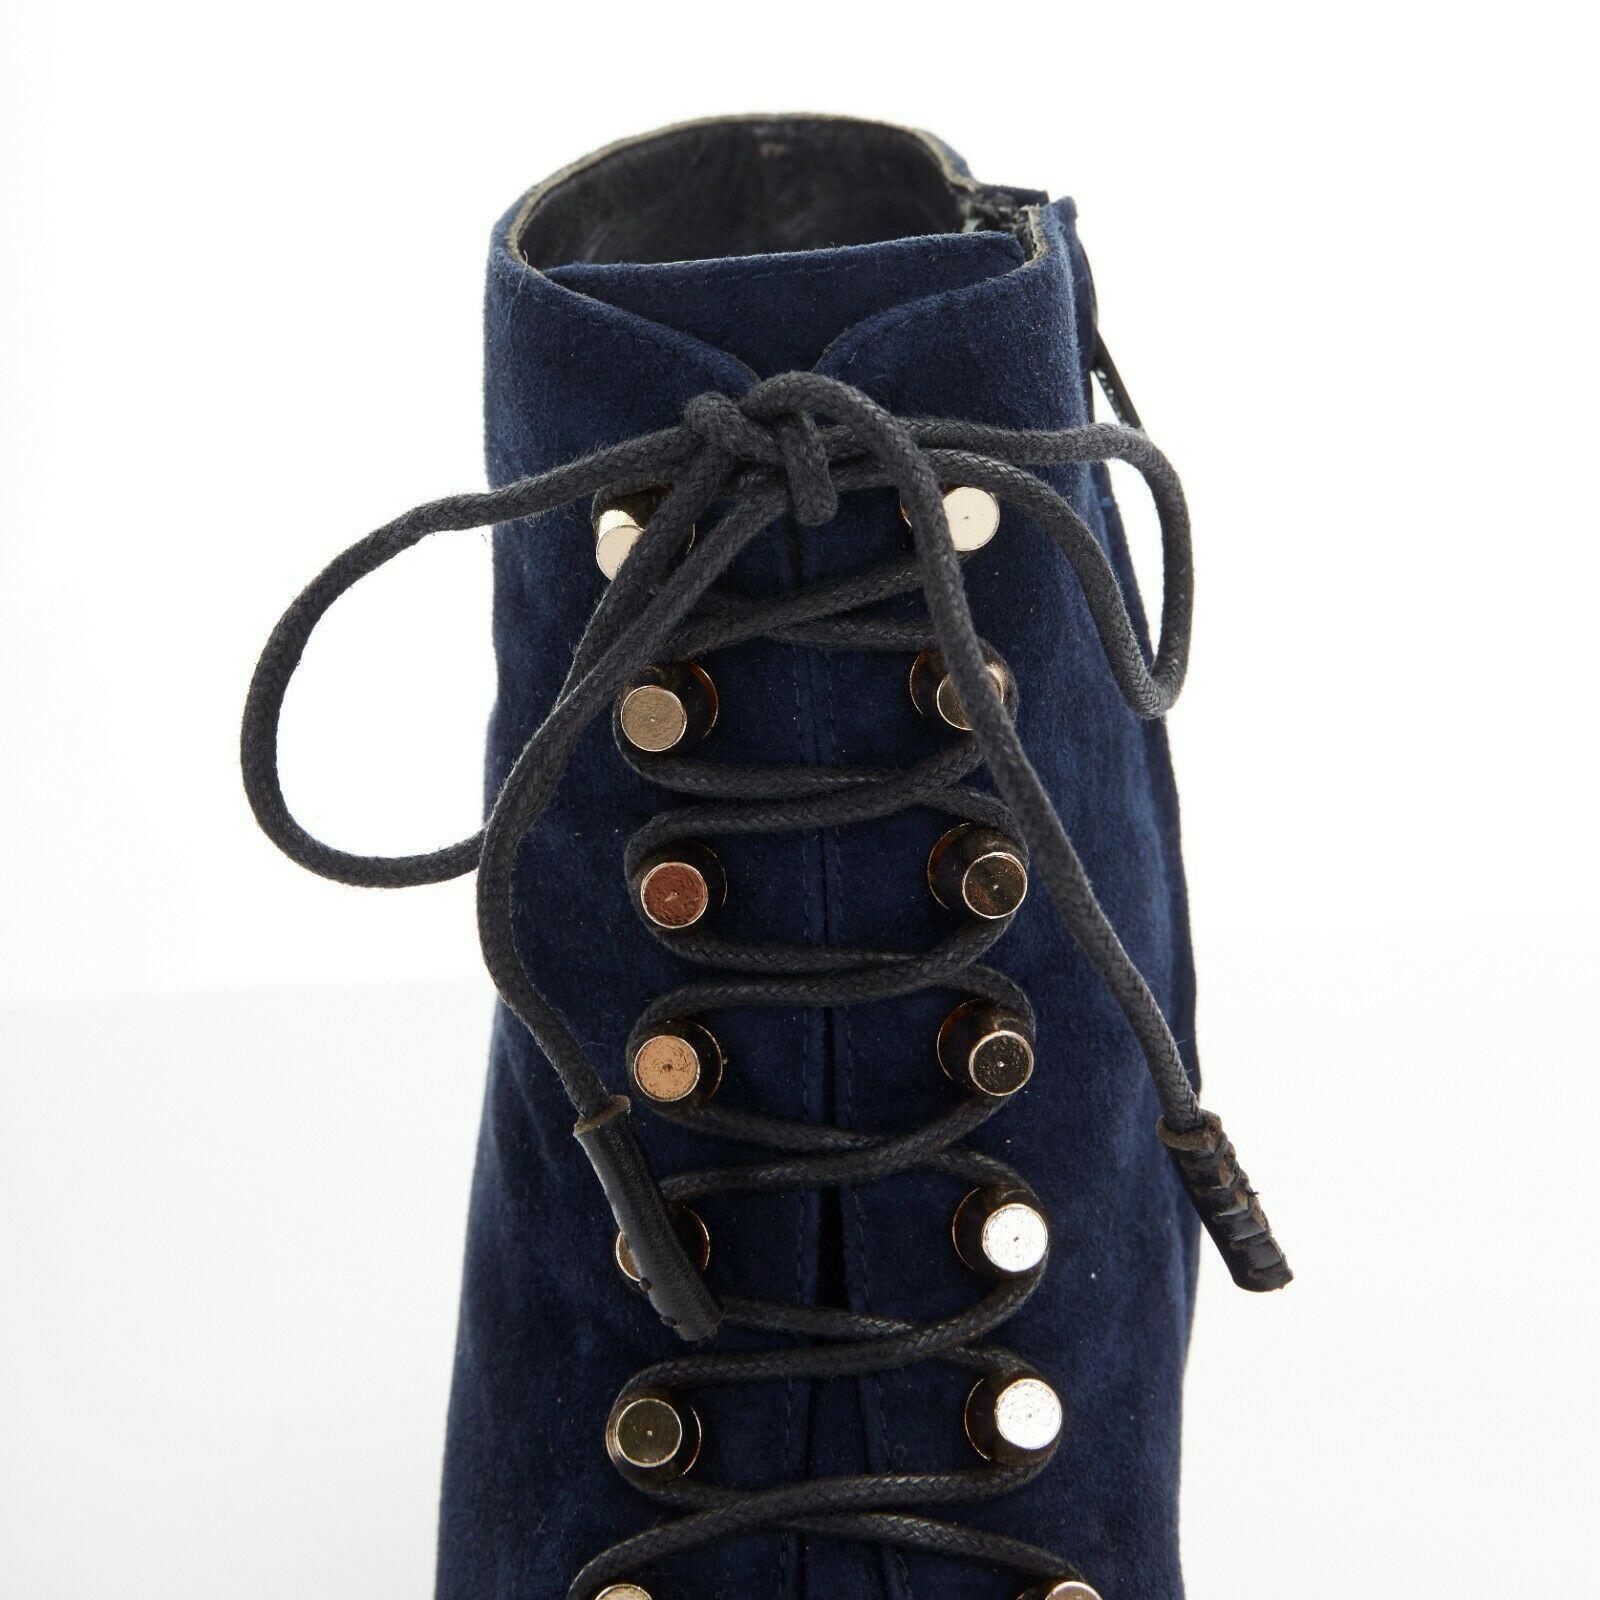 BALENCIAGA navy blue suede gold-tone stud lace up point toe ankle bootie EU37 2